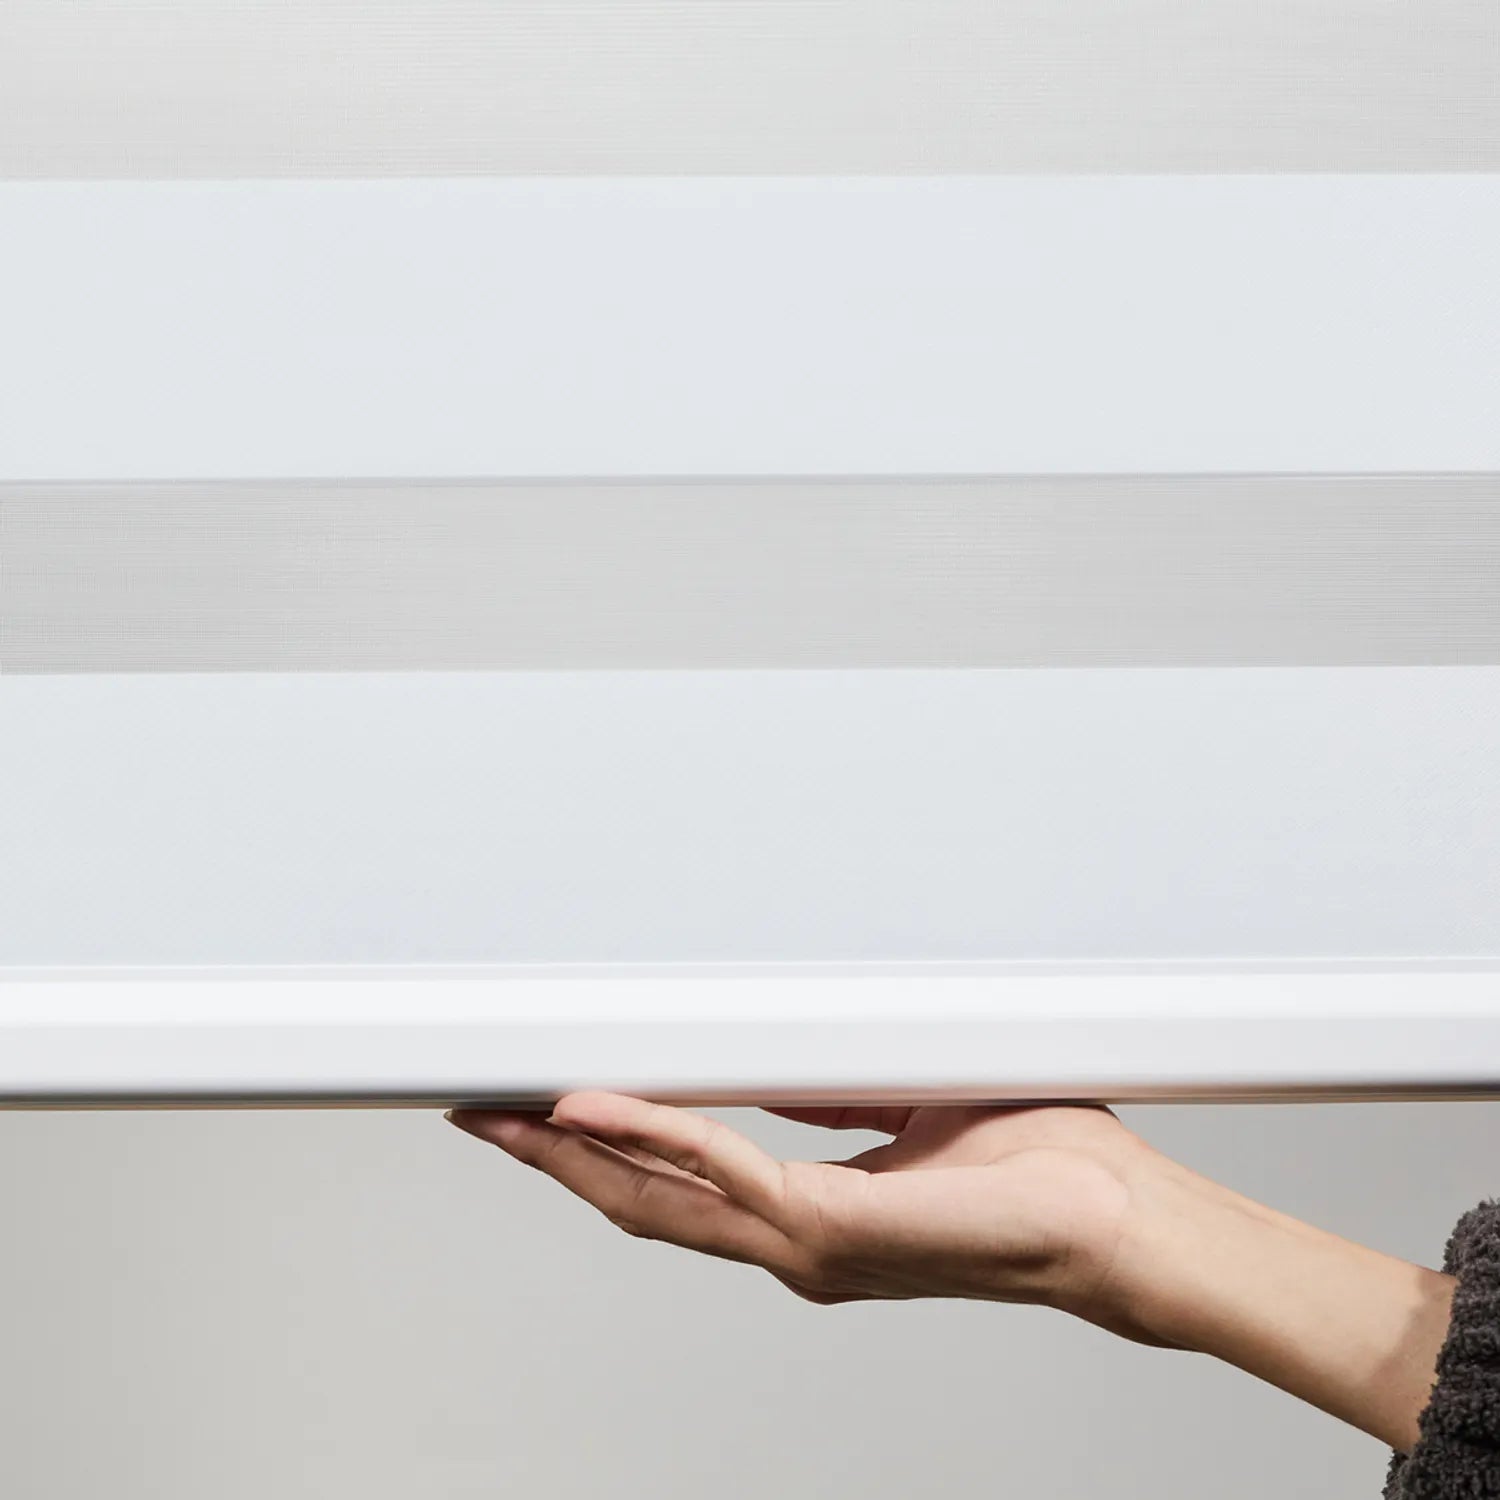 Person adjusting premium Zebra roller shade with dual-layer polyester fabric in light gray and white, showcasing cordless lift functionality